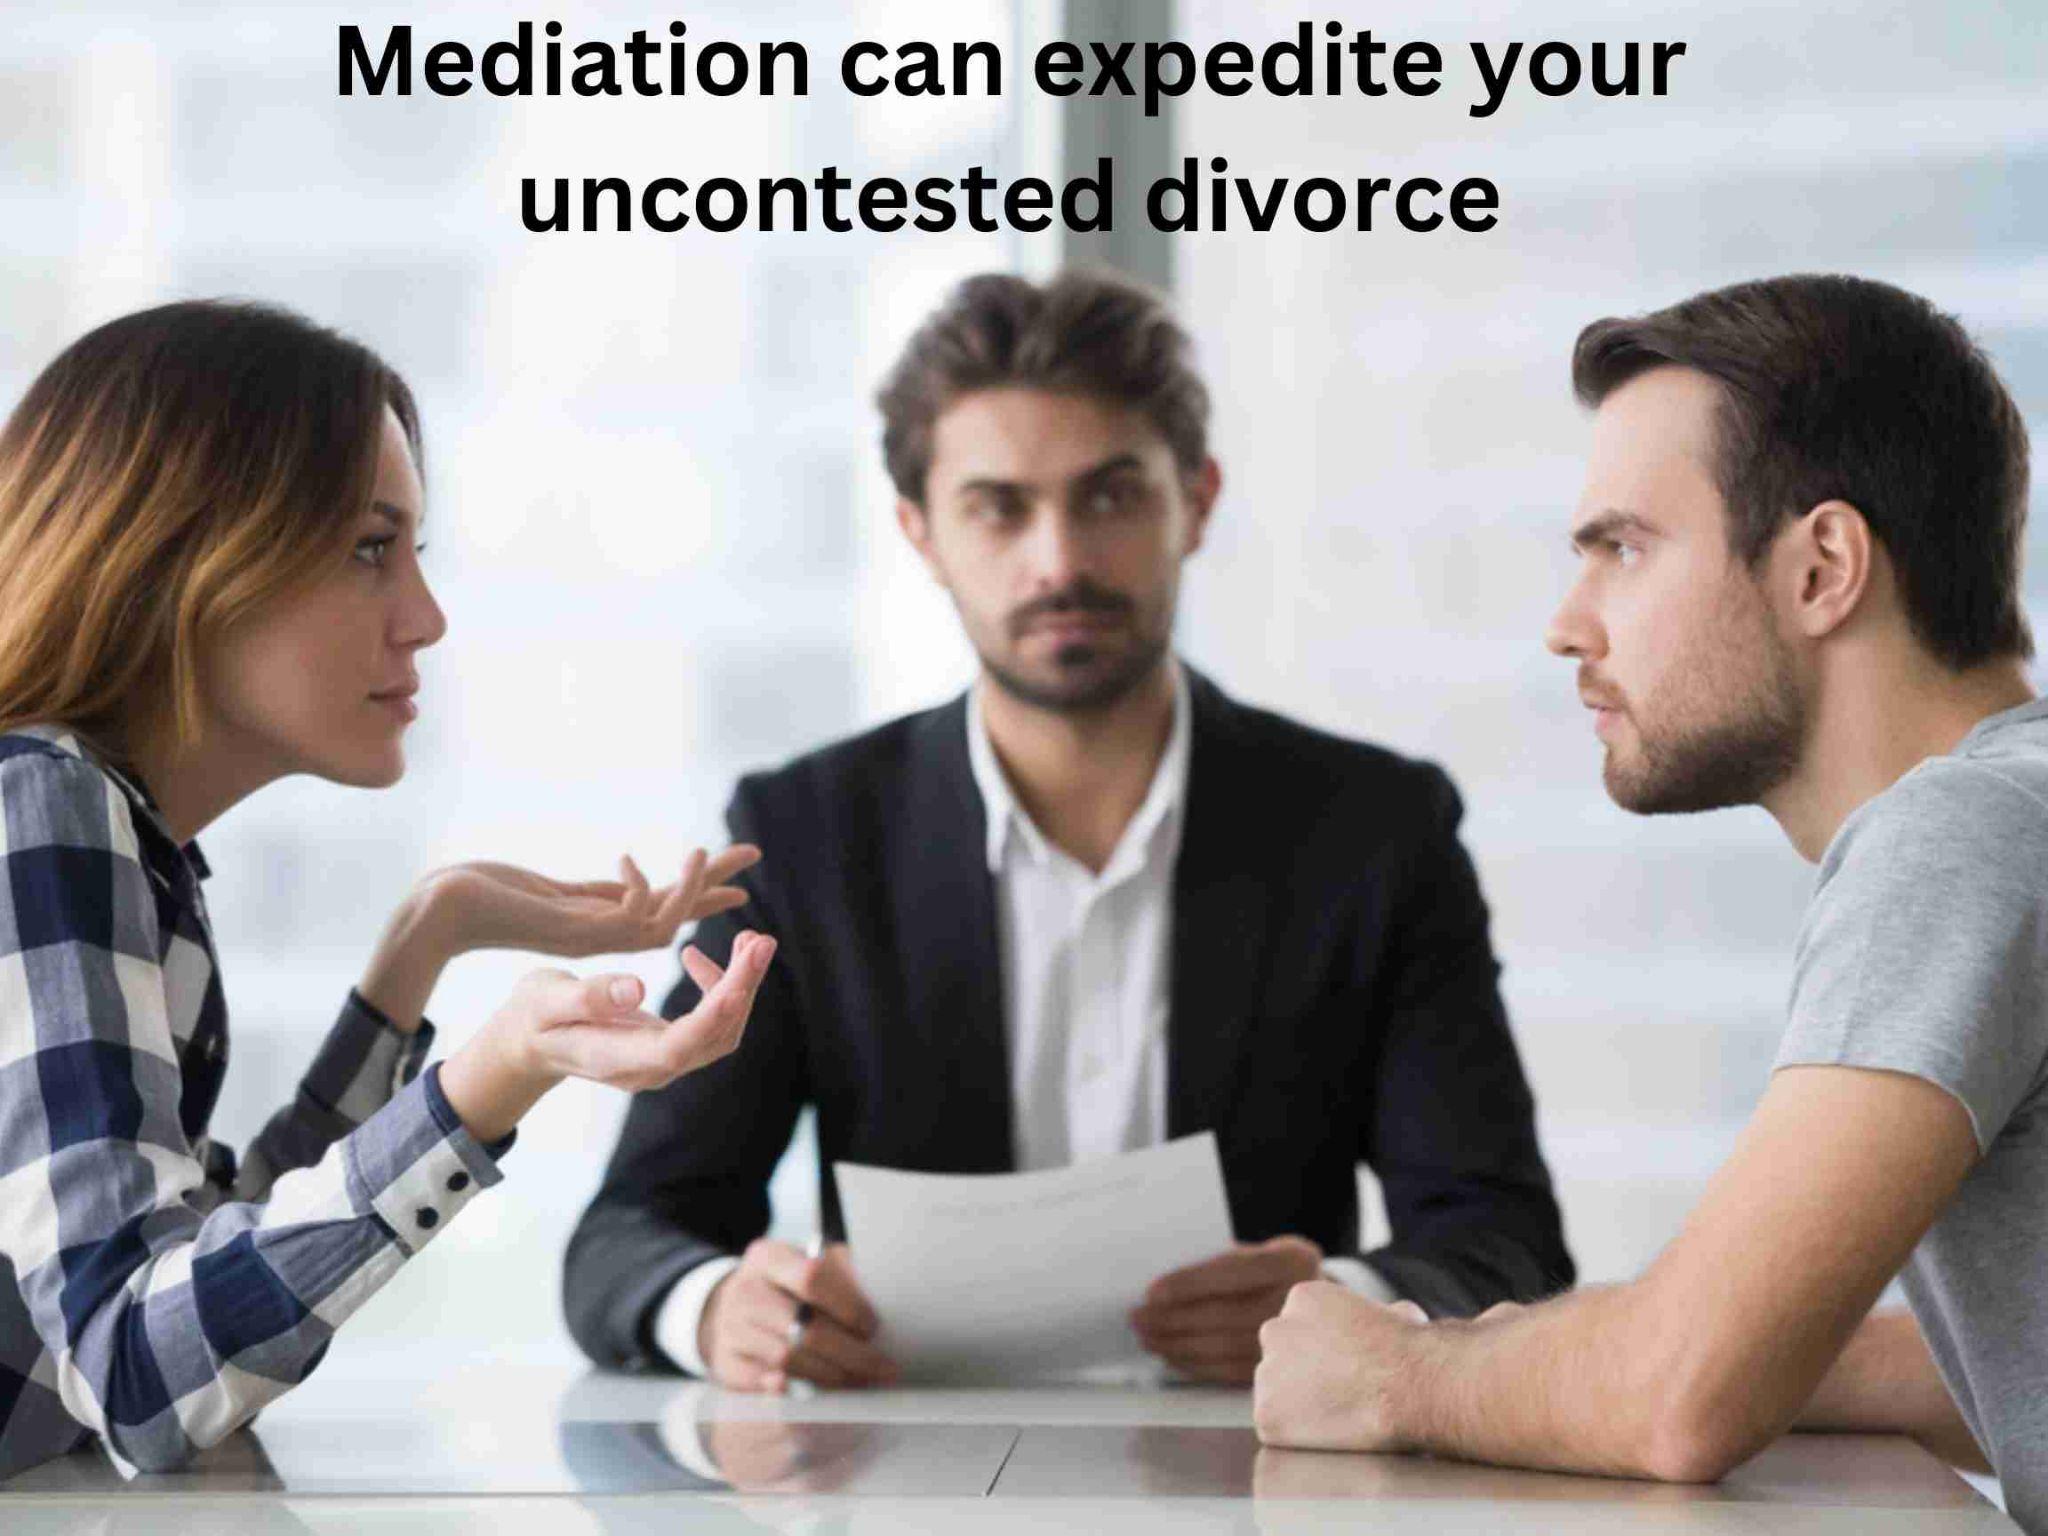 Why Is My Uncontested Divorce Taking So Long? Answers Here